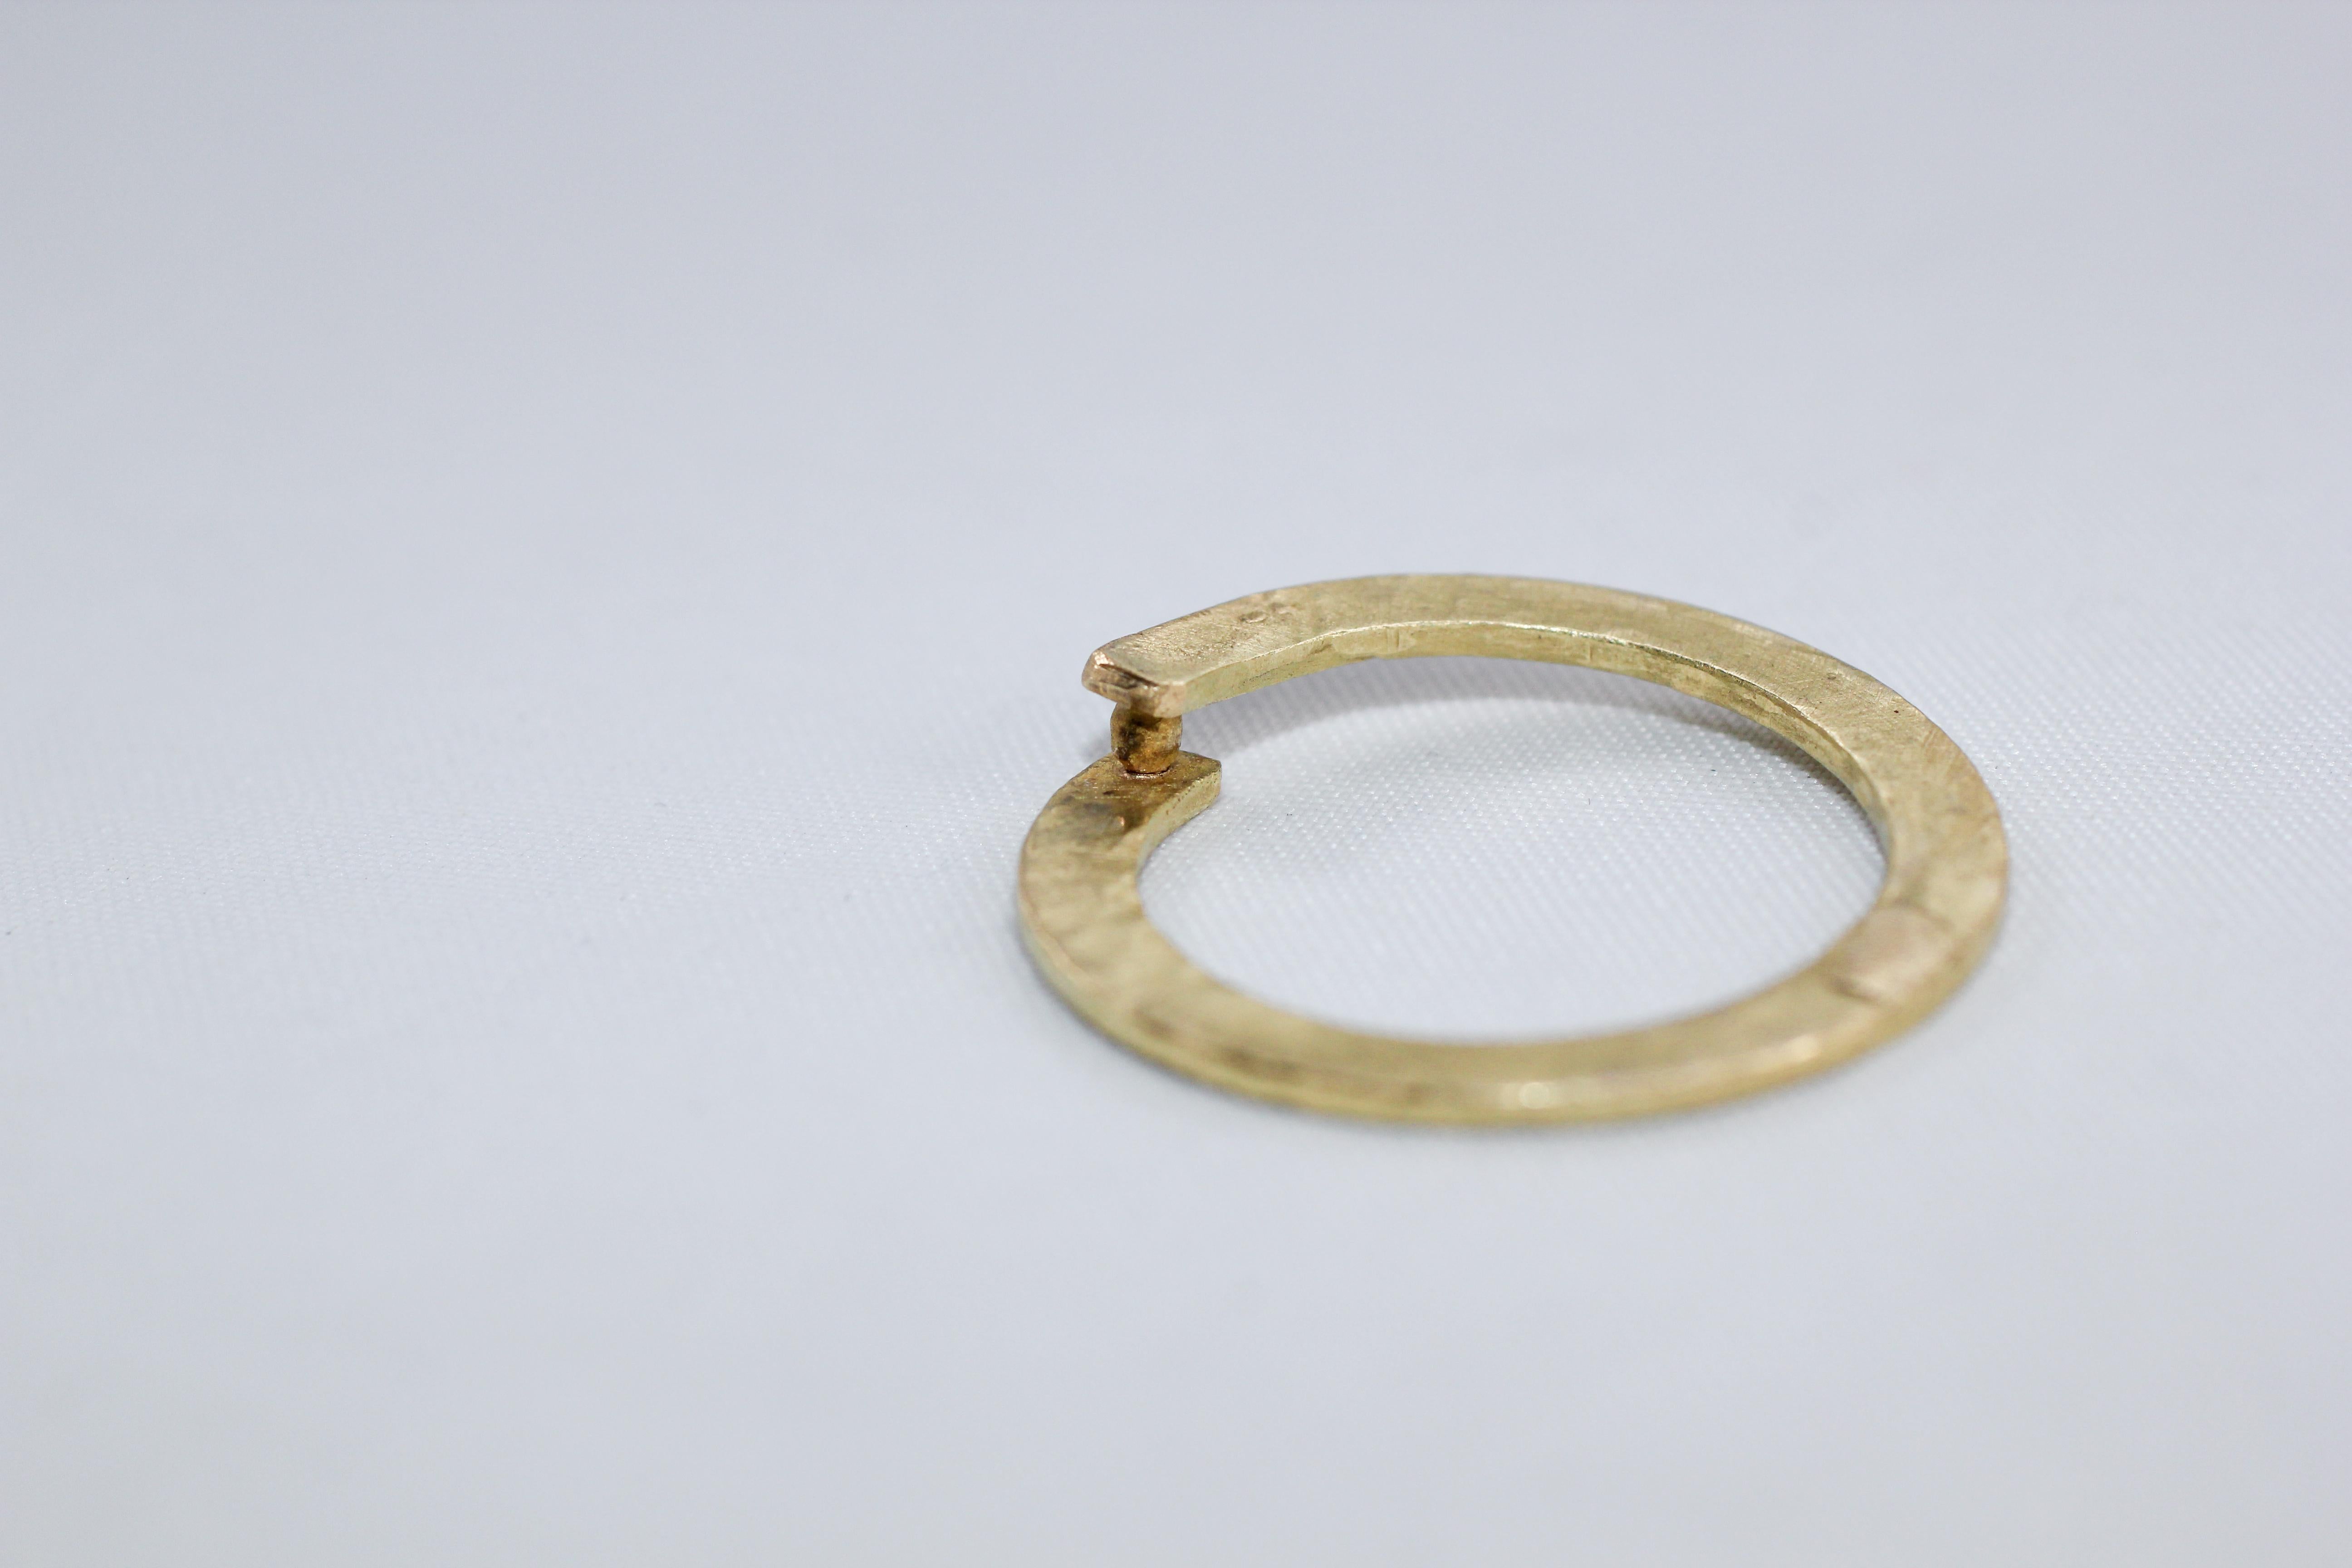 18K gold fashion ring. Simplicity With A Twist holding One granule, modern design.

This listing is for a fashion ring in 18 Karat Gold, measuring 1mm wide by 3mm thick.

Process: This striking ring is first hand forged in 21k gold, then cast in